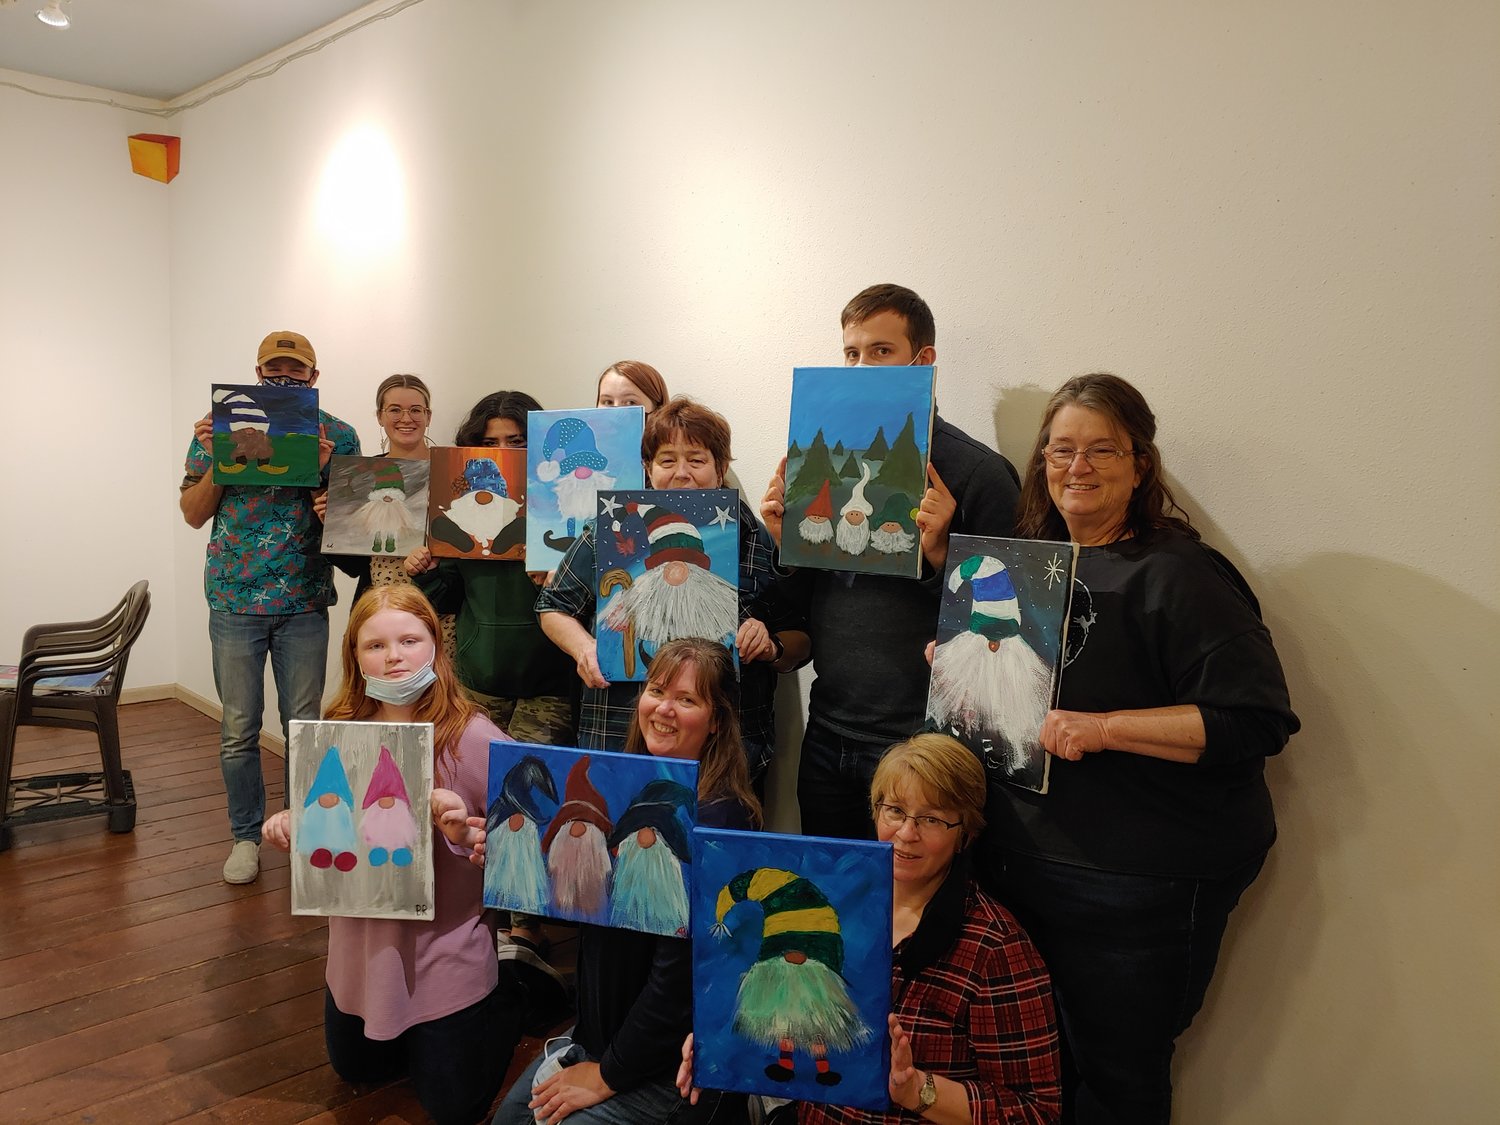 Participants hold up their paintings in this photograph provided by Julie McDonald.